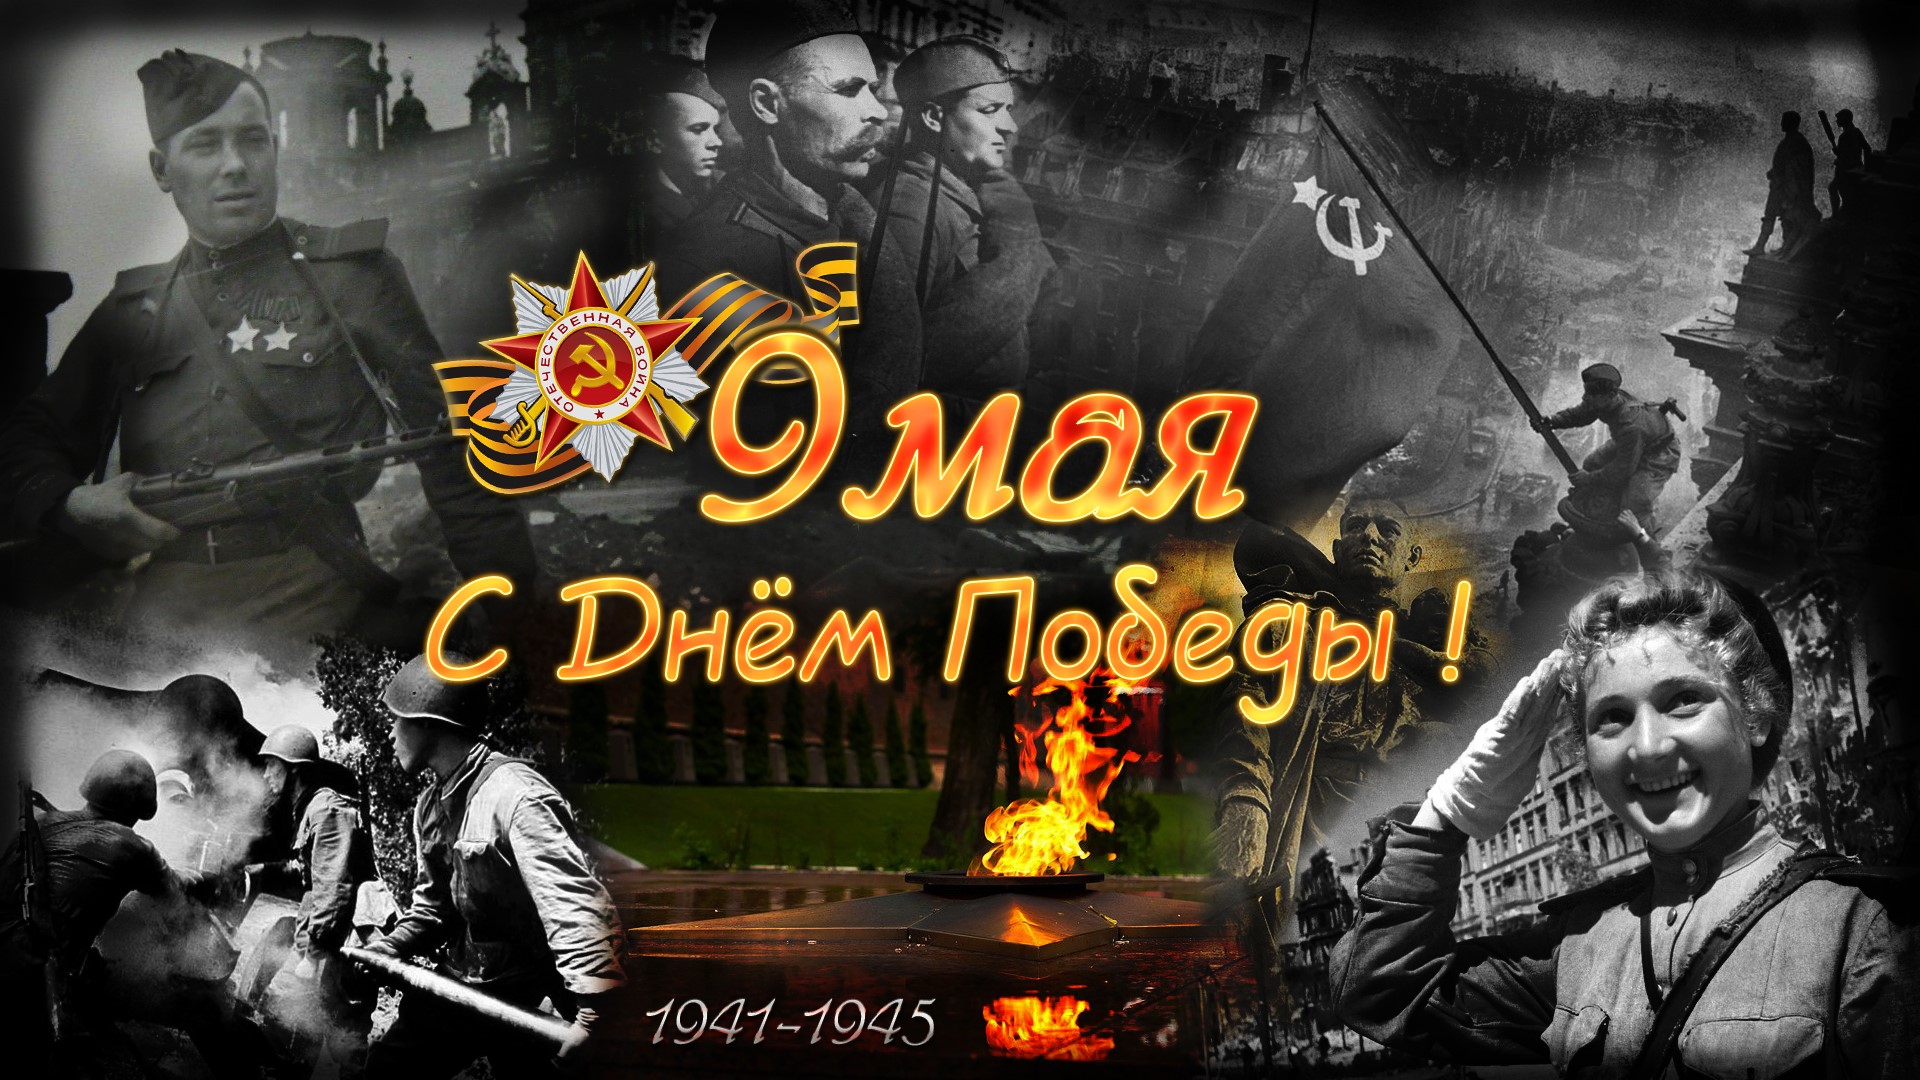 Victory Day (9 May) Wallpapers